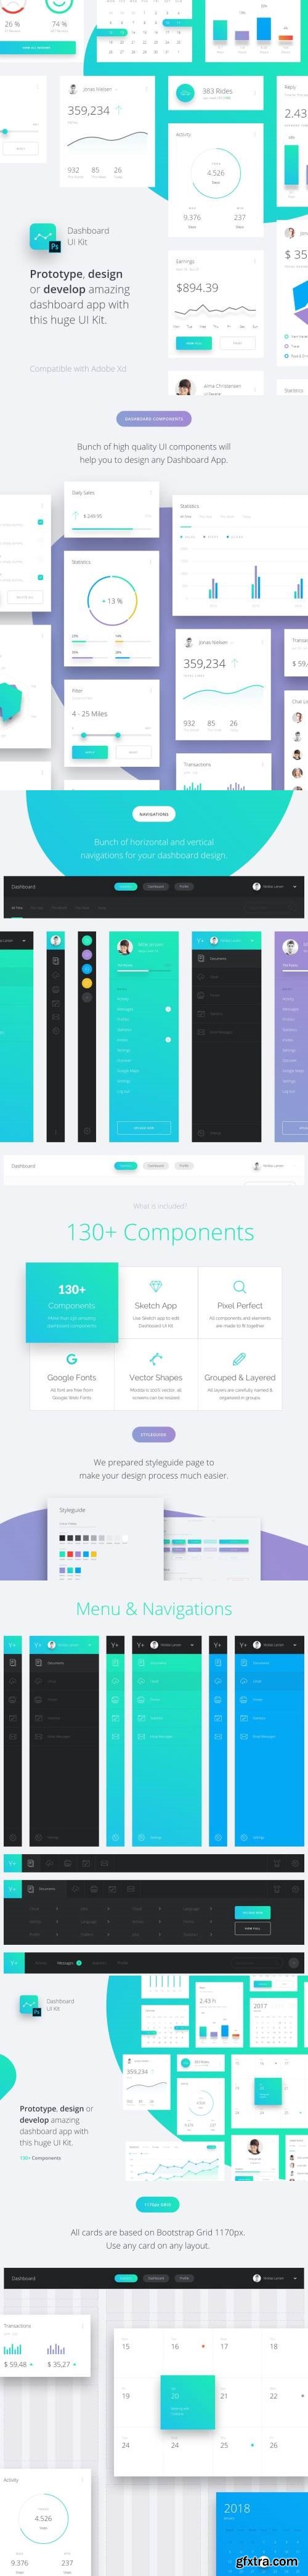 Datta - Dashboard UI Kit for Ps